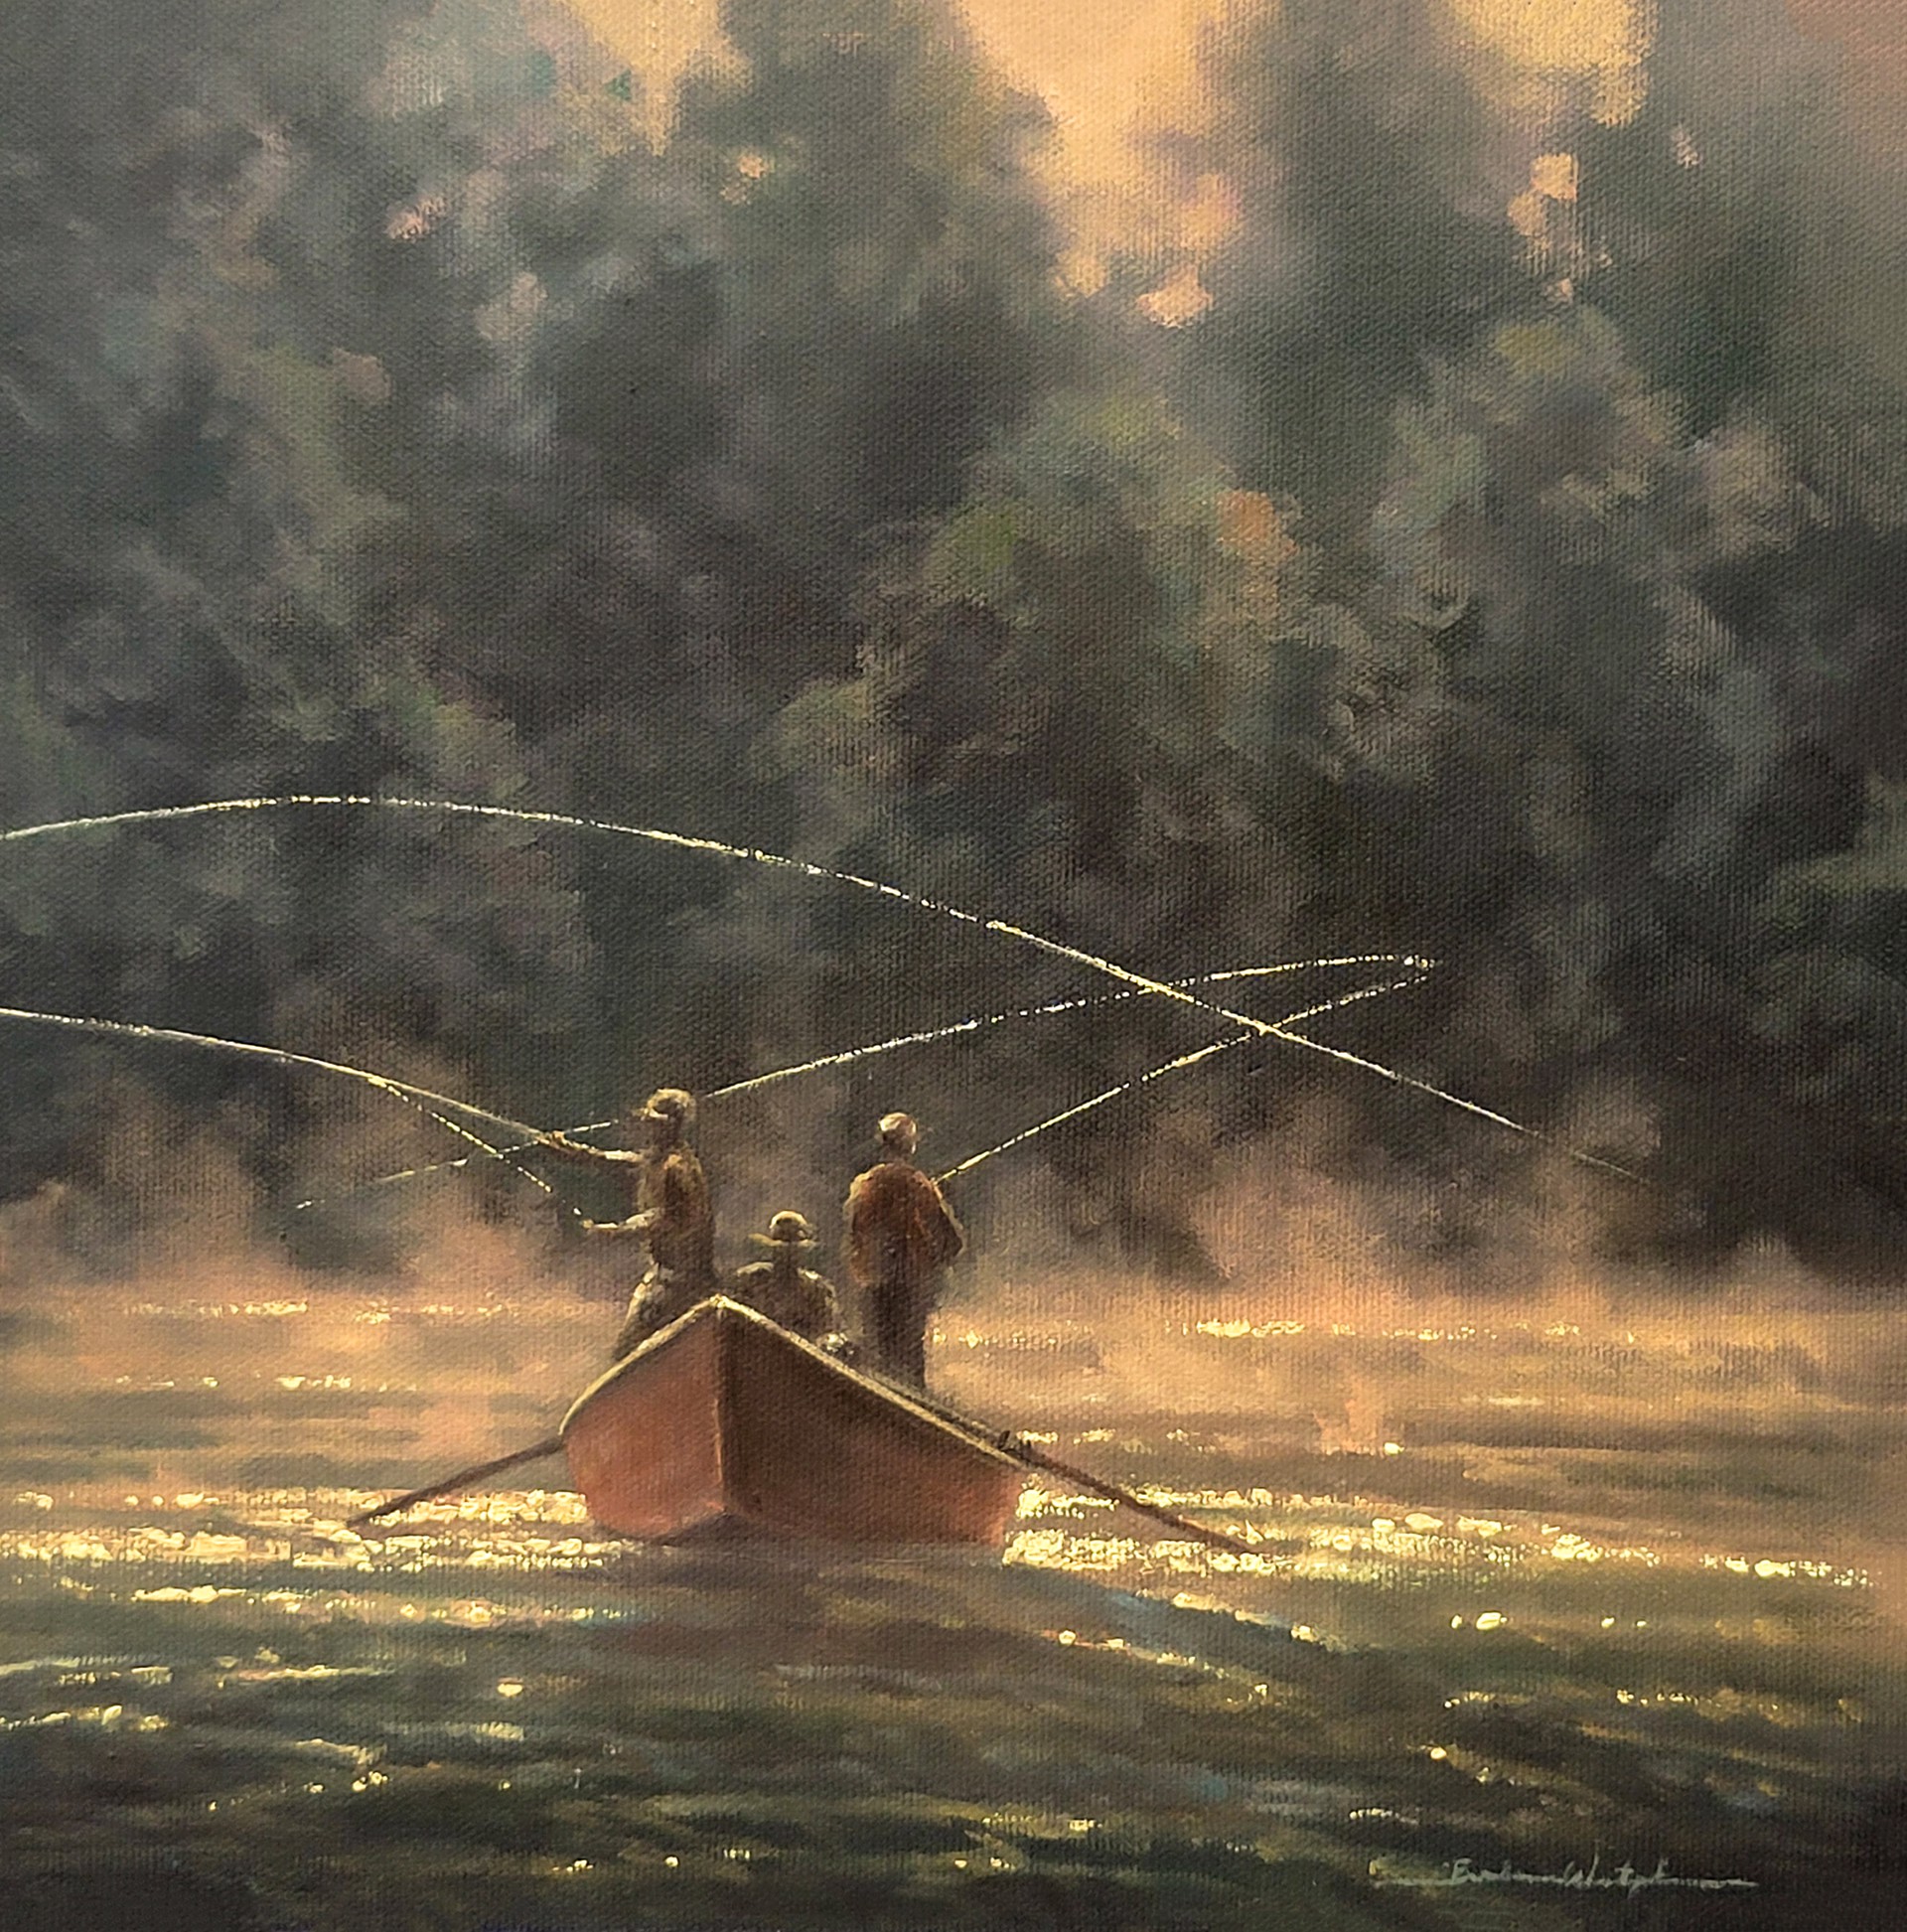 A Day on the Water by Brooke Wetzel